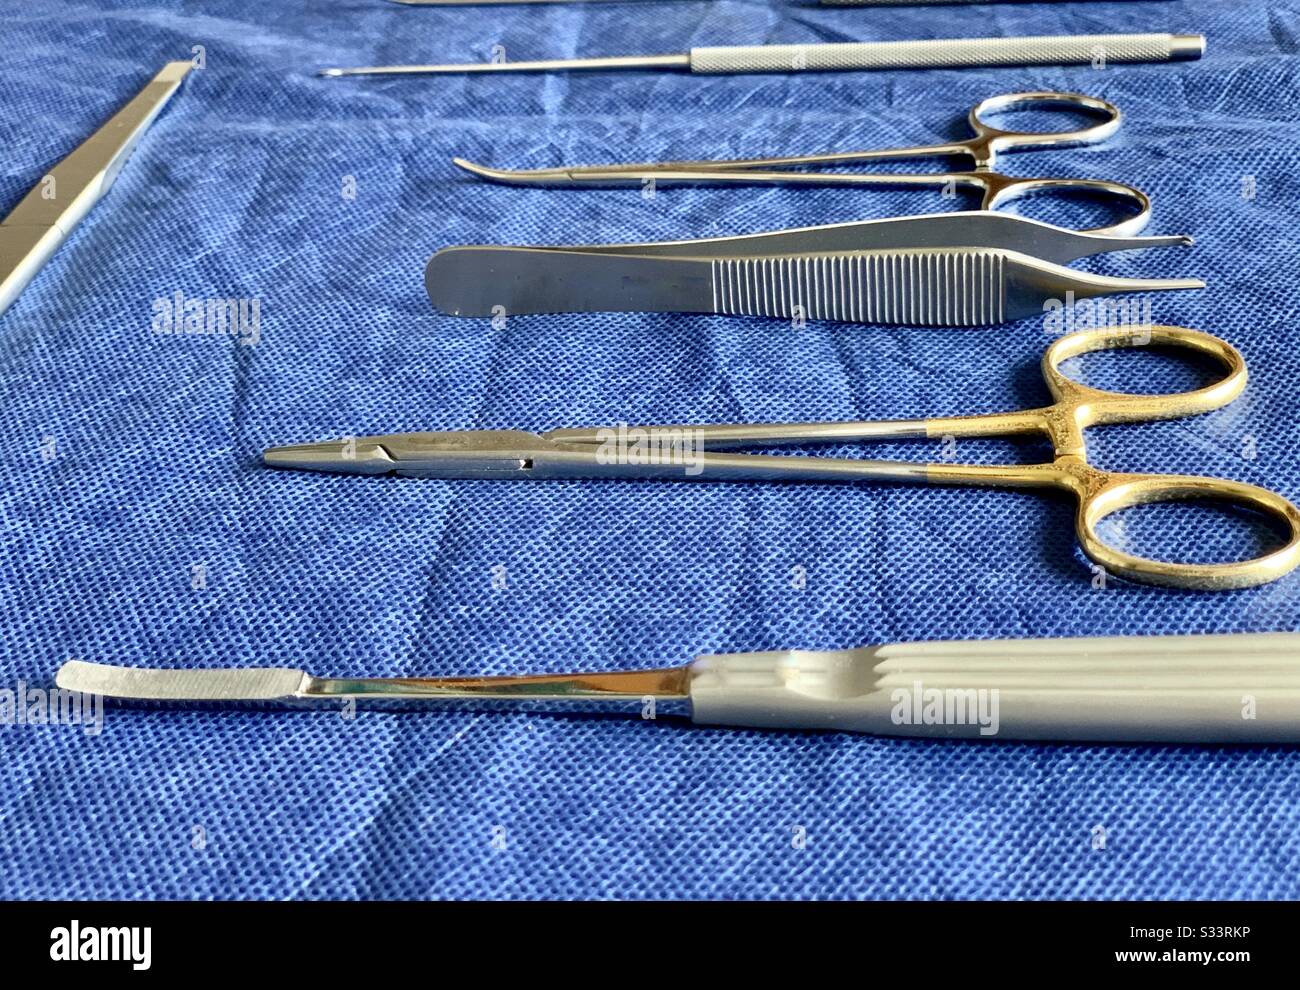 https://c8.alamy.com/comp/S33RKP/surgical-instruments-for-plastic-surgery-needle-holder-adson-forceps-gillies-skin-hook-and-others-S33RKP.jpg